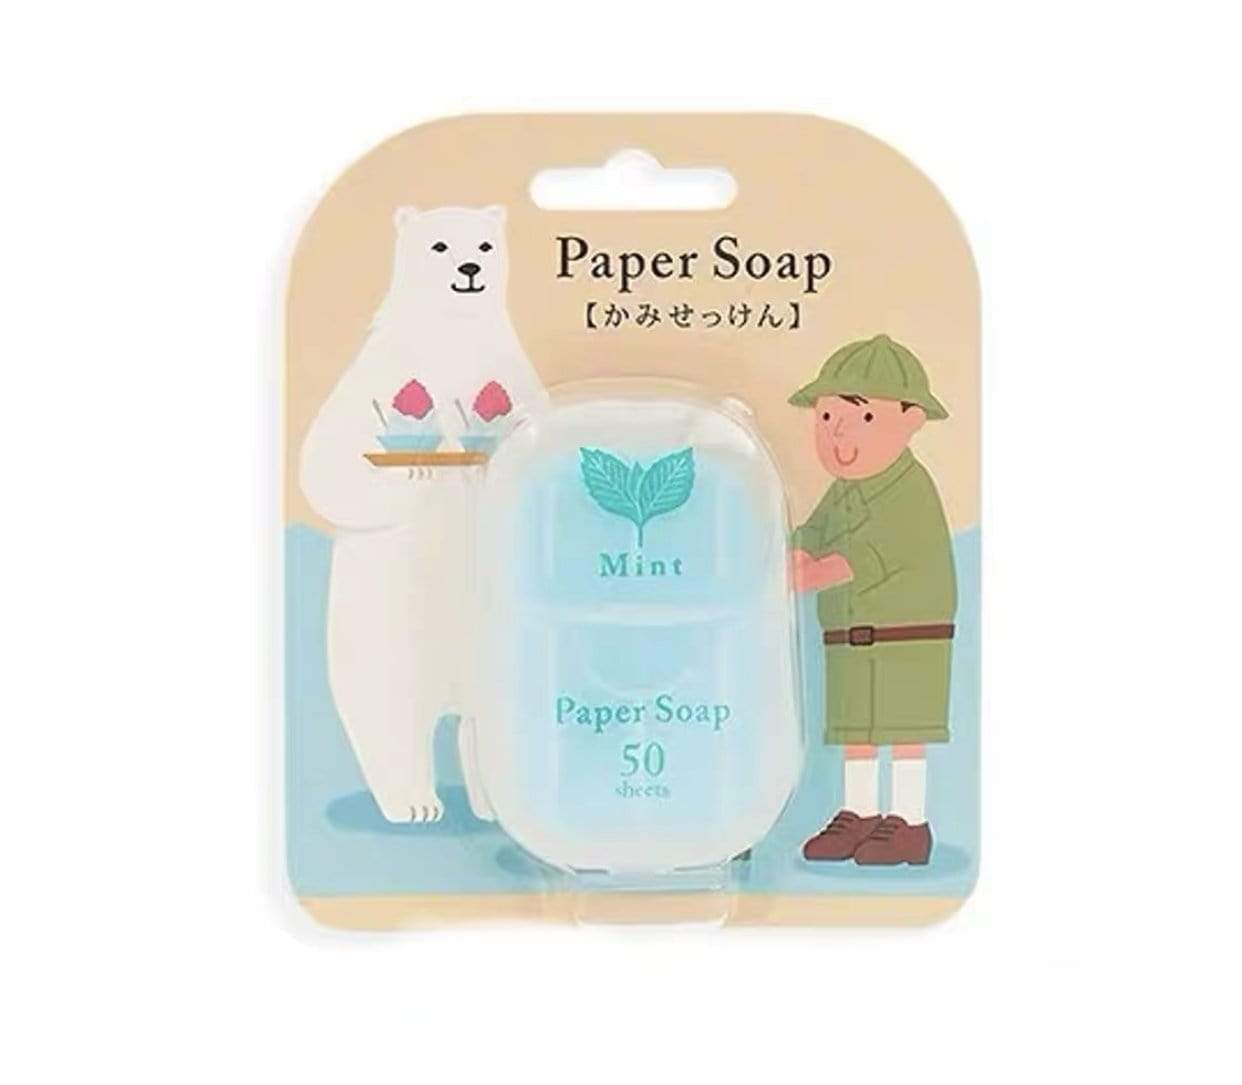 Helms Store Accessories Mint CHARLEY Portable Paper Soap from Japan 50pc